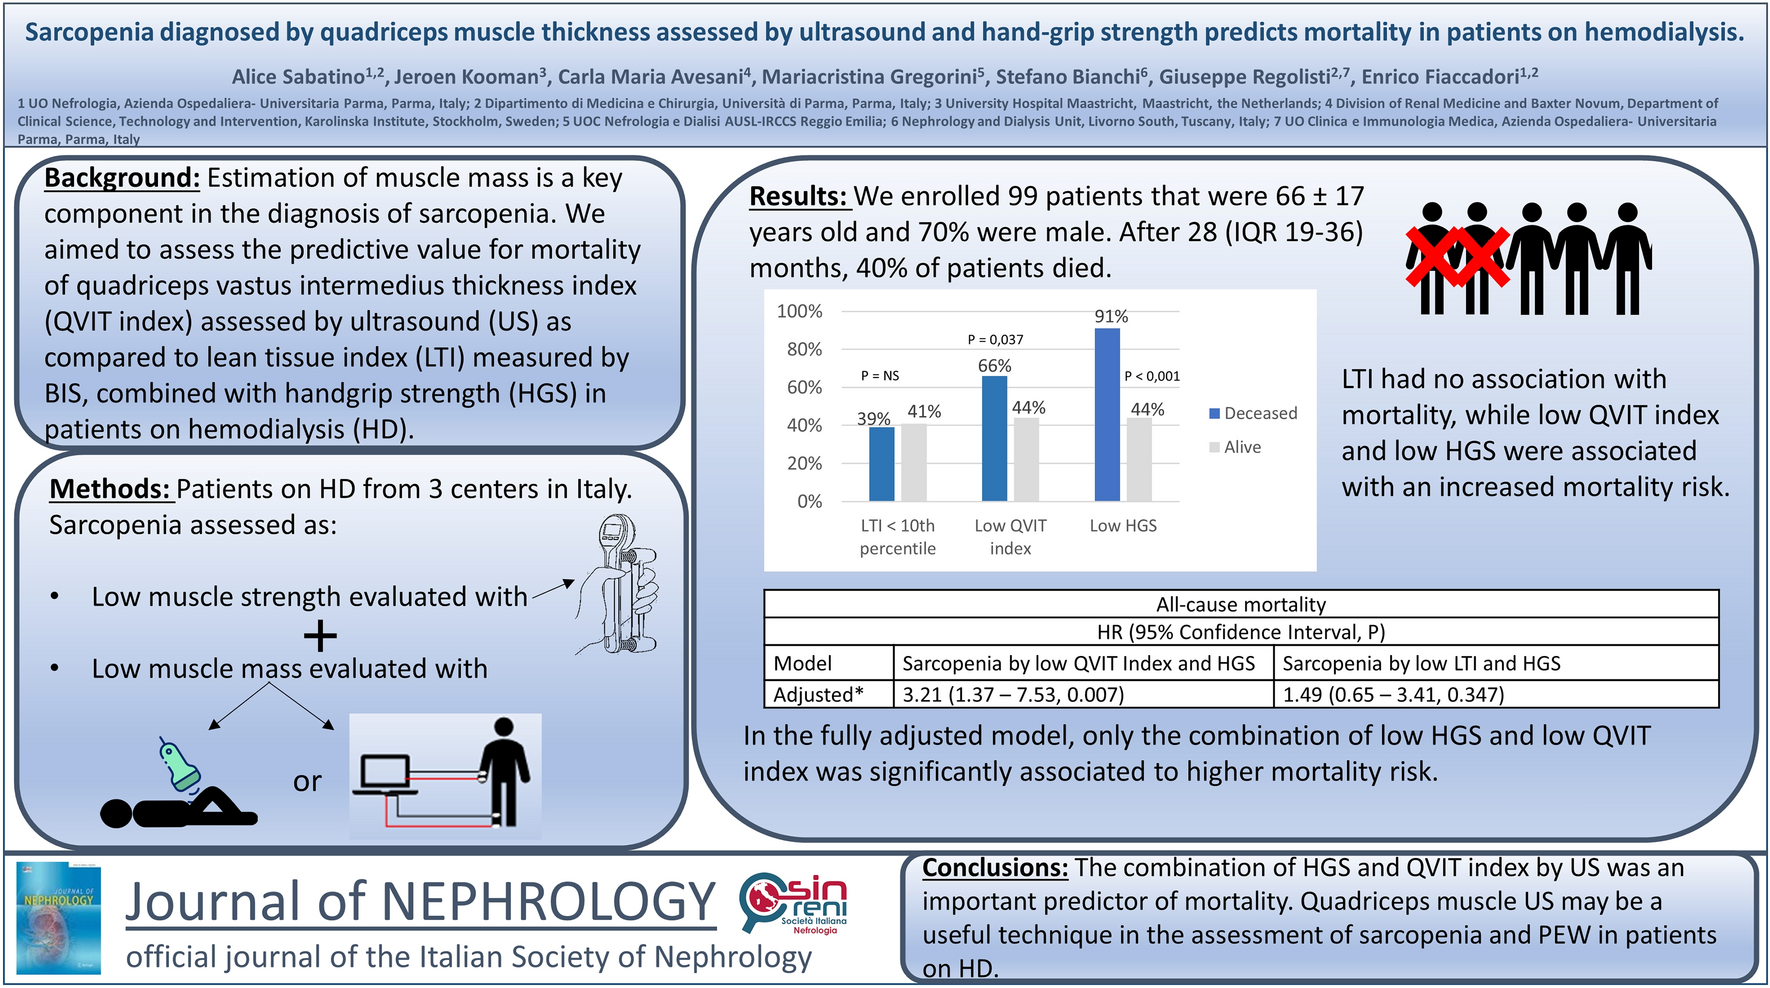 Sarcopenia diagnosed by ultrasound-assessed quadriceps muscle thickness and handgrip strength predicts mortality in patients on hemodialysis